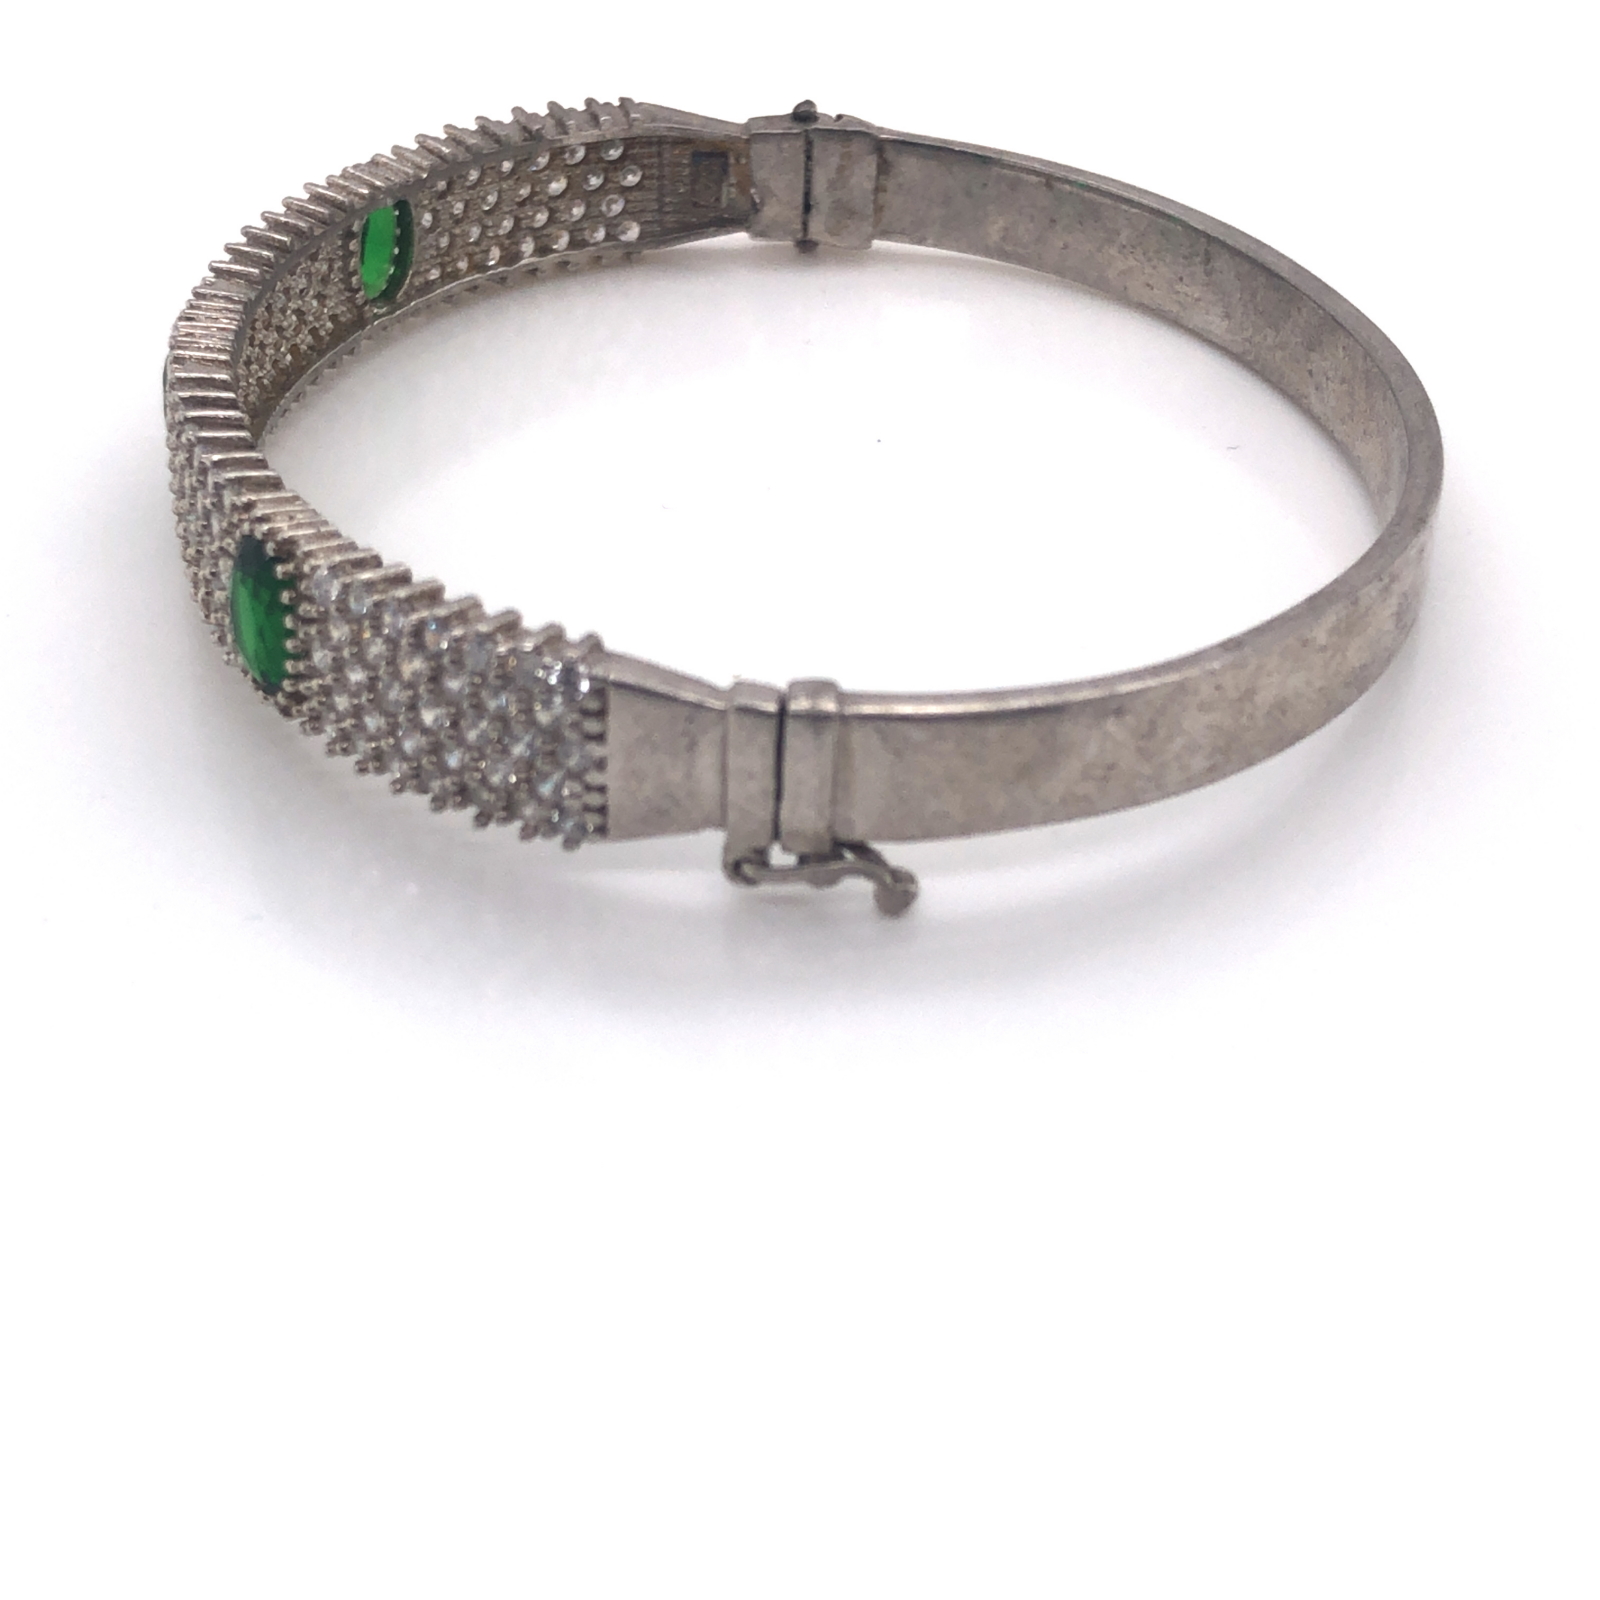 A SILVER AND CUBIC ZIRCONIA SET SPRUNG LOADED HINGED DRESS BANGLE WITH ATTACHED FIGURE OF EIGHT - Image 3 of 3